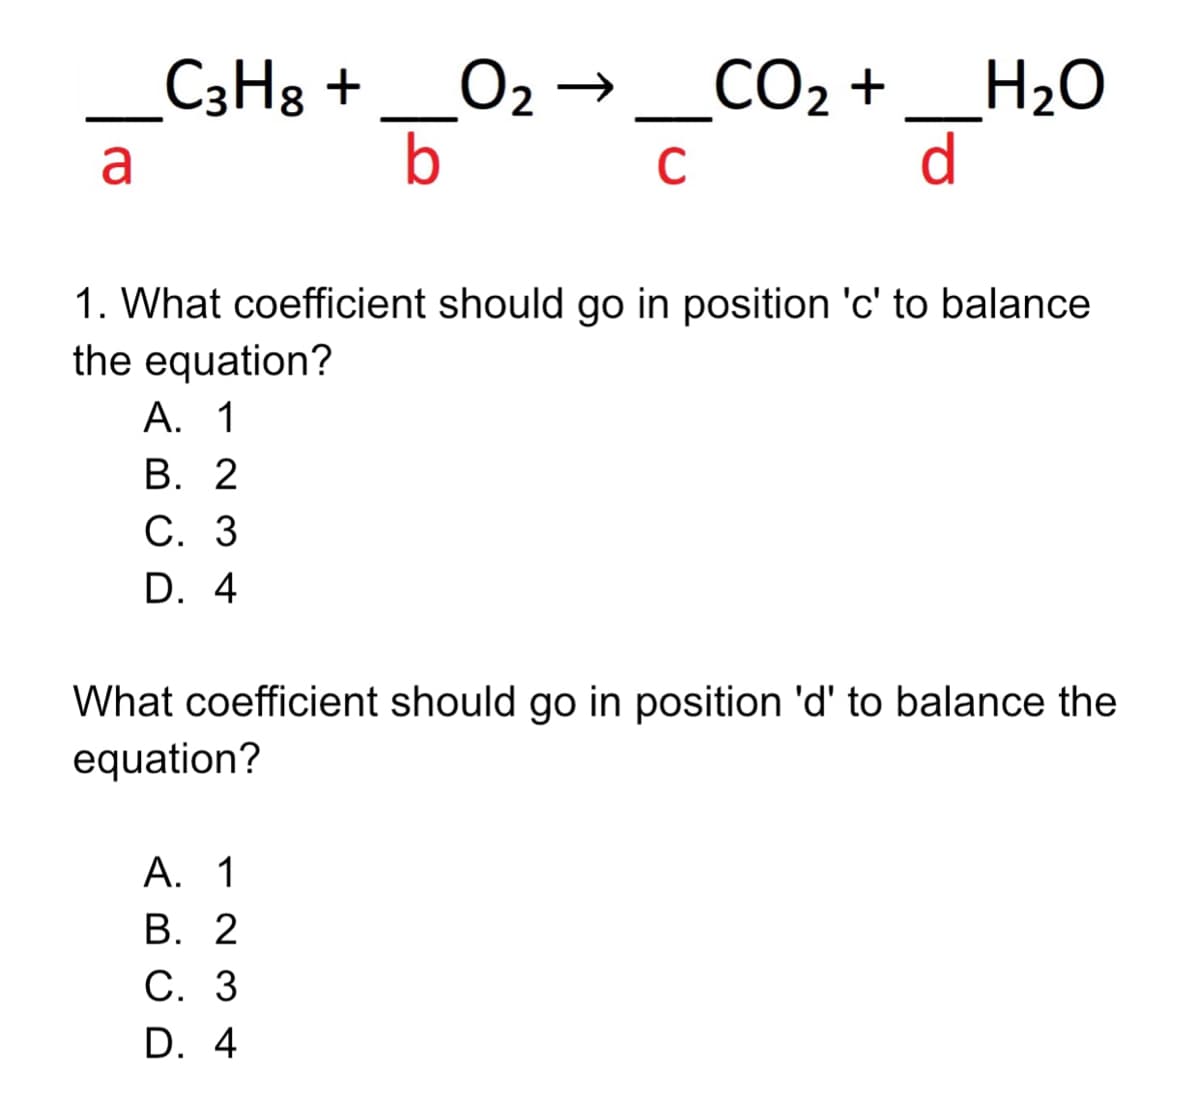 O2 →_CO2 +
b
_H2O
d
_C3H8 +
a
C
1. What coefficient should go in position 'c' to balance
the equation?
А. 1
В. 2
С. 3
D. 4
What coefficient should go in position 'd' to balance the
equation?
А. 1
В. 2
С. 3
D. 4
